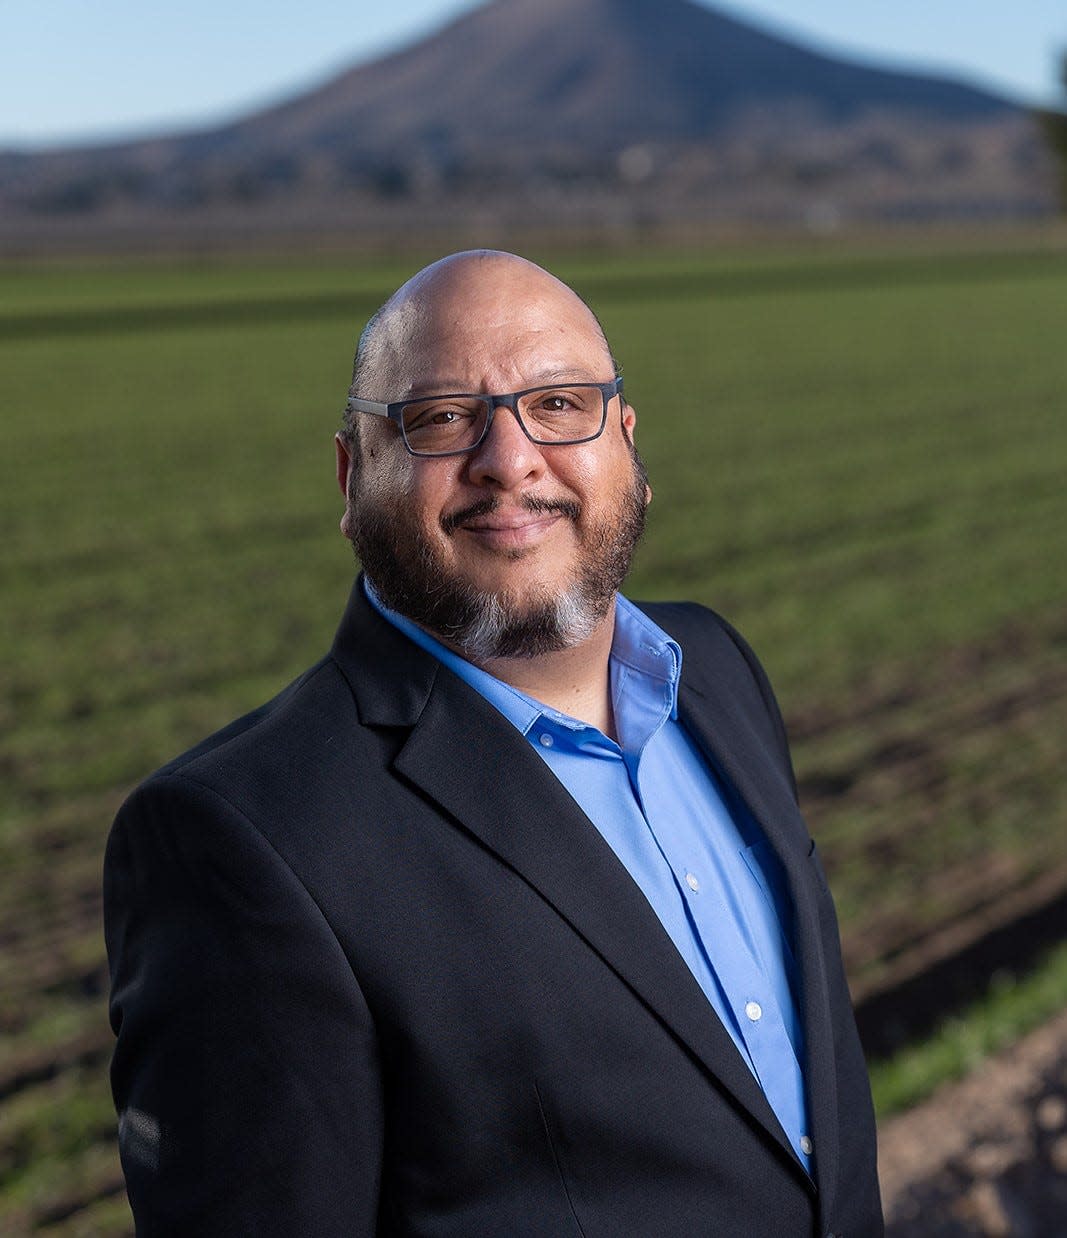 Ruben Reyes is a Democrat running for Doña Ana County Assessor.